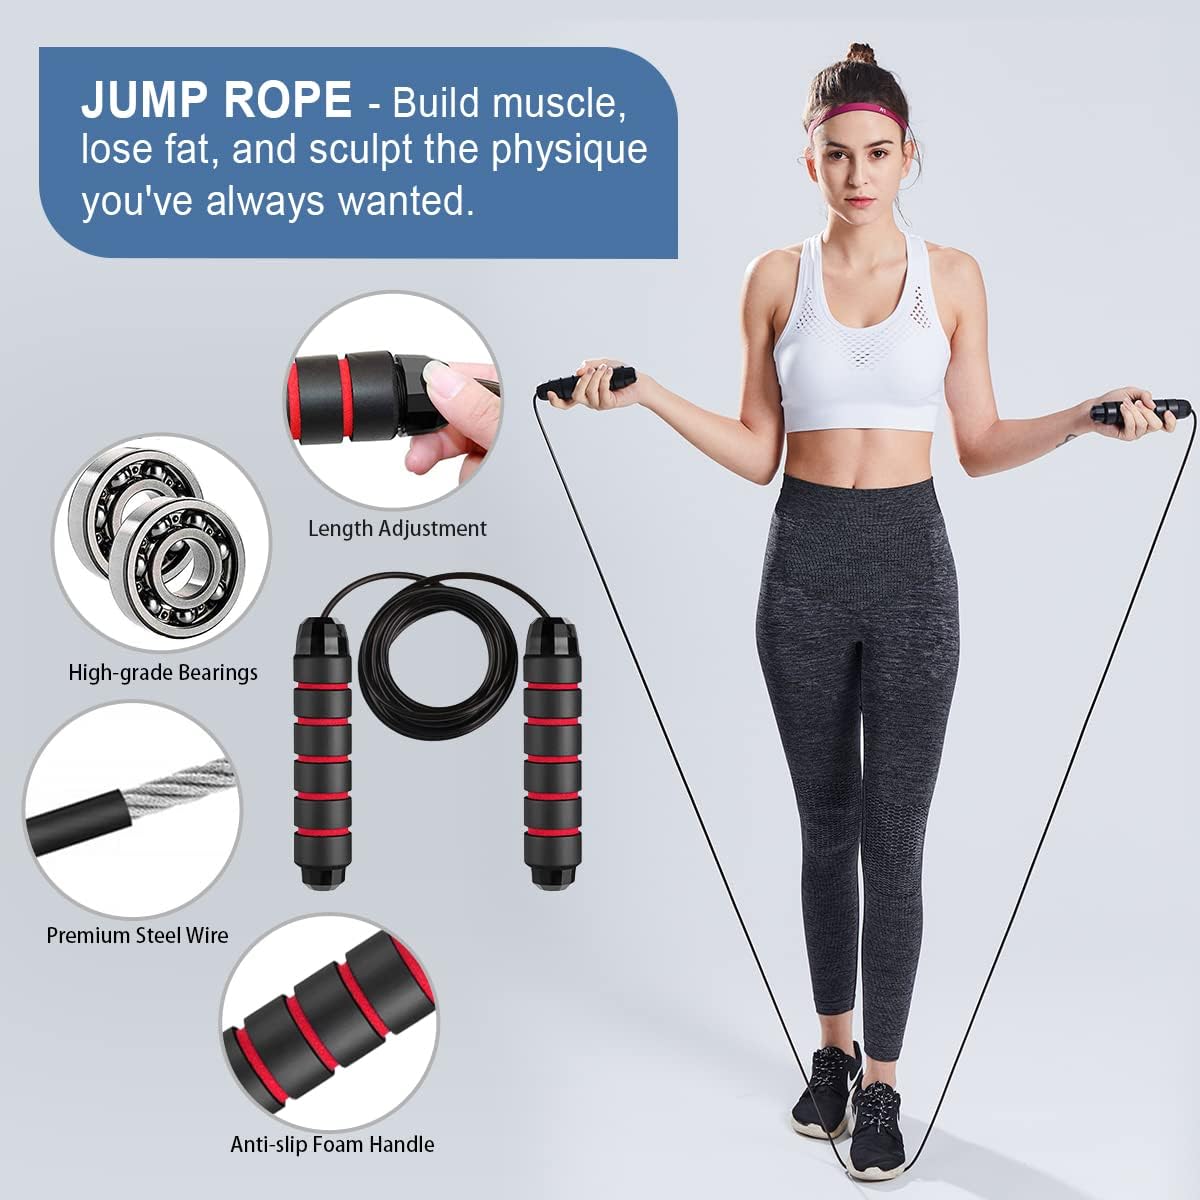 GREAT! GREAT! GREAT! Ab Roller Wheel, 10-In-1 Ab Exercise Wheels Kit with Resistance Bands, Knee Mat, Jump Rope, Push-Up Bar - Home Gym Equipment for Men Women Core Strength & Abdominal Exercise